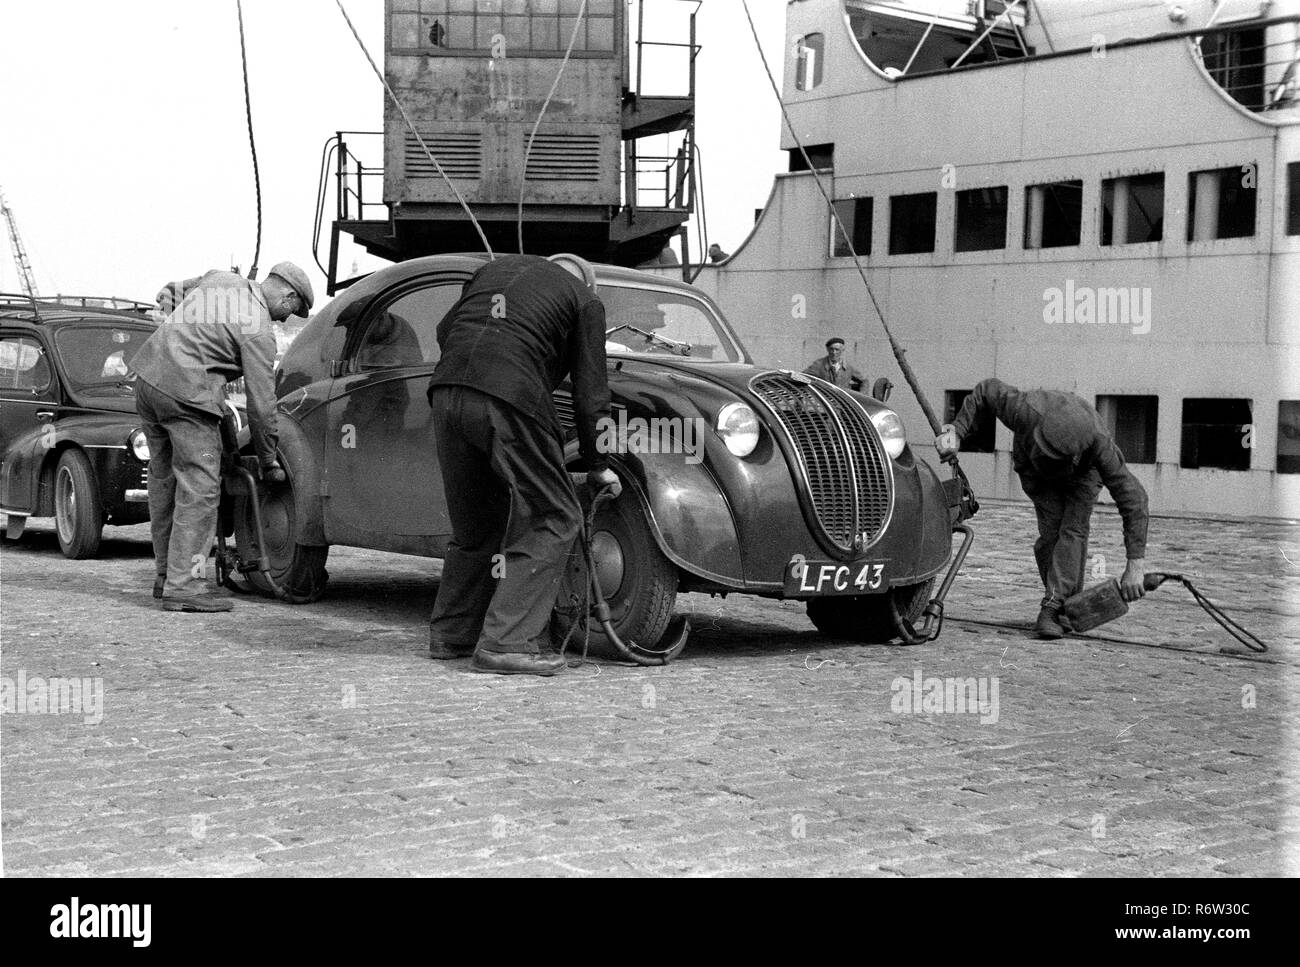 Calais France 1948 British cars being loaded on ferries Stock Photo